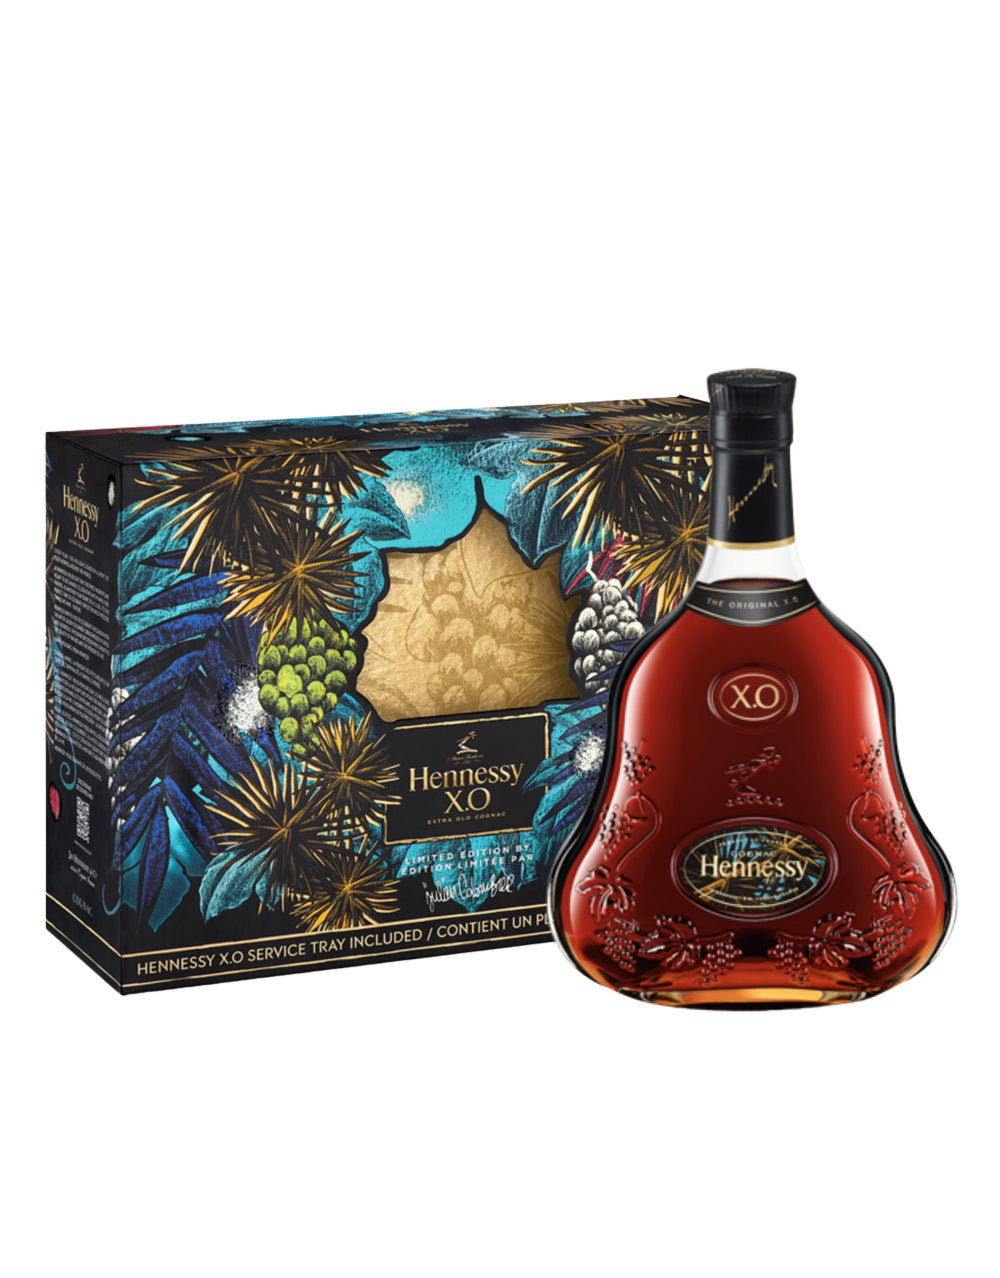 Julien Colombier LE Hennessy X.O Gift Box